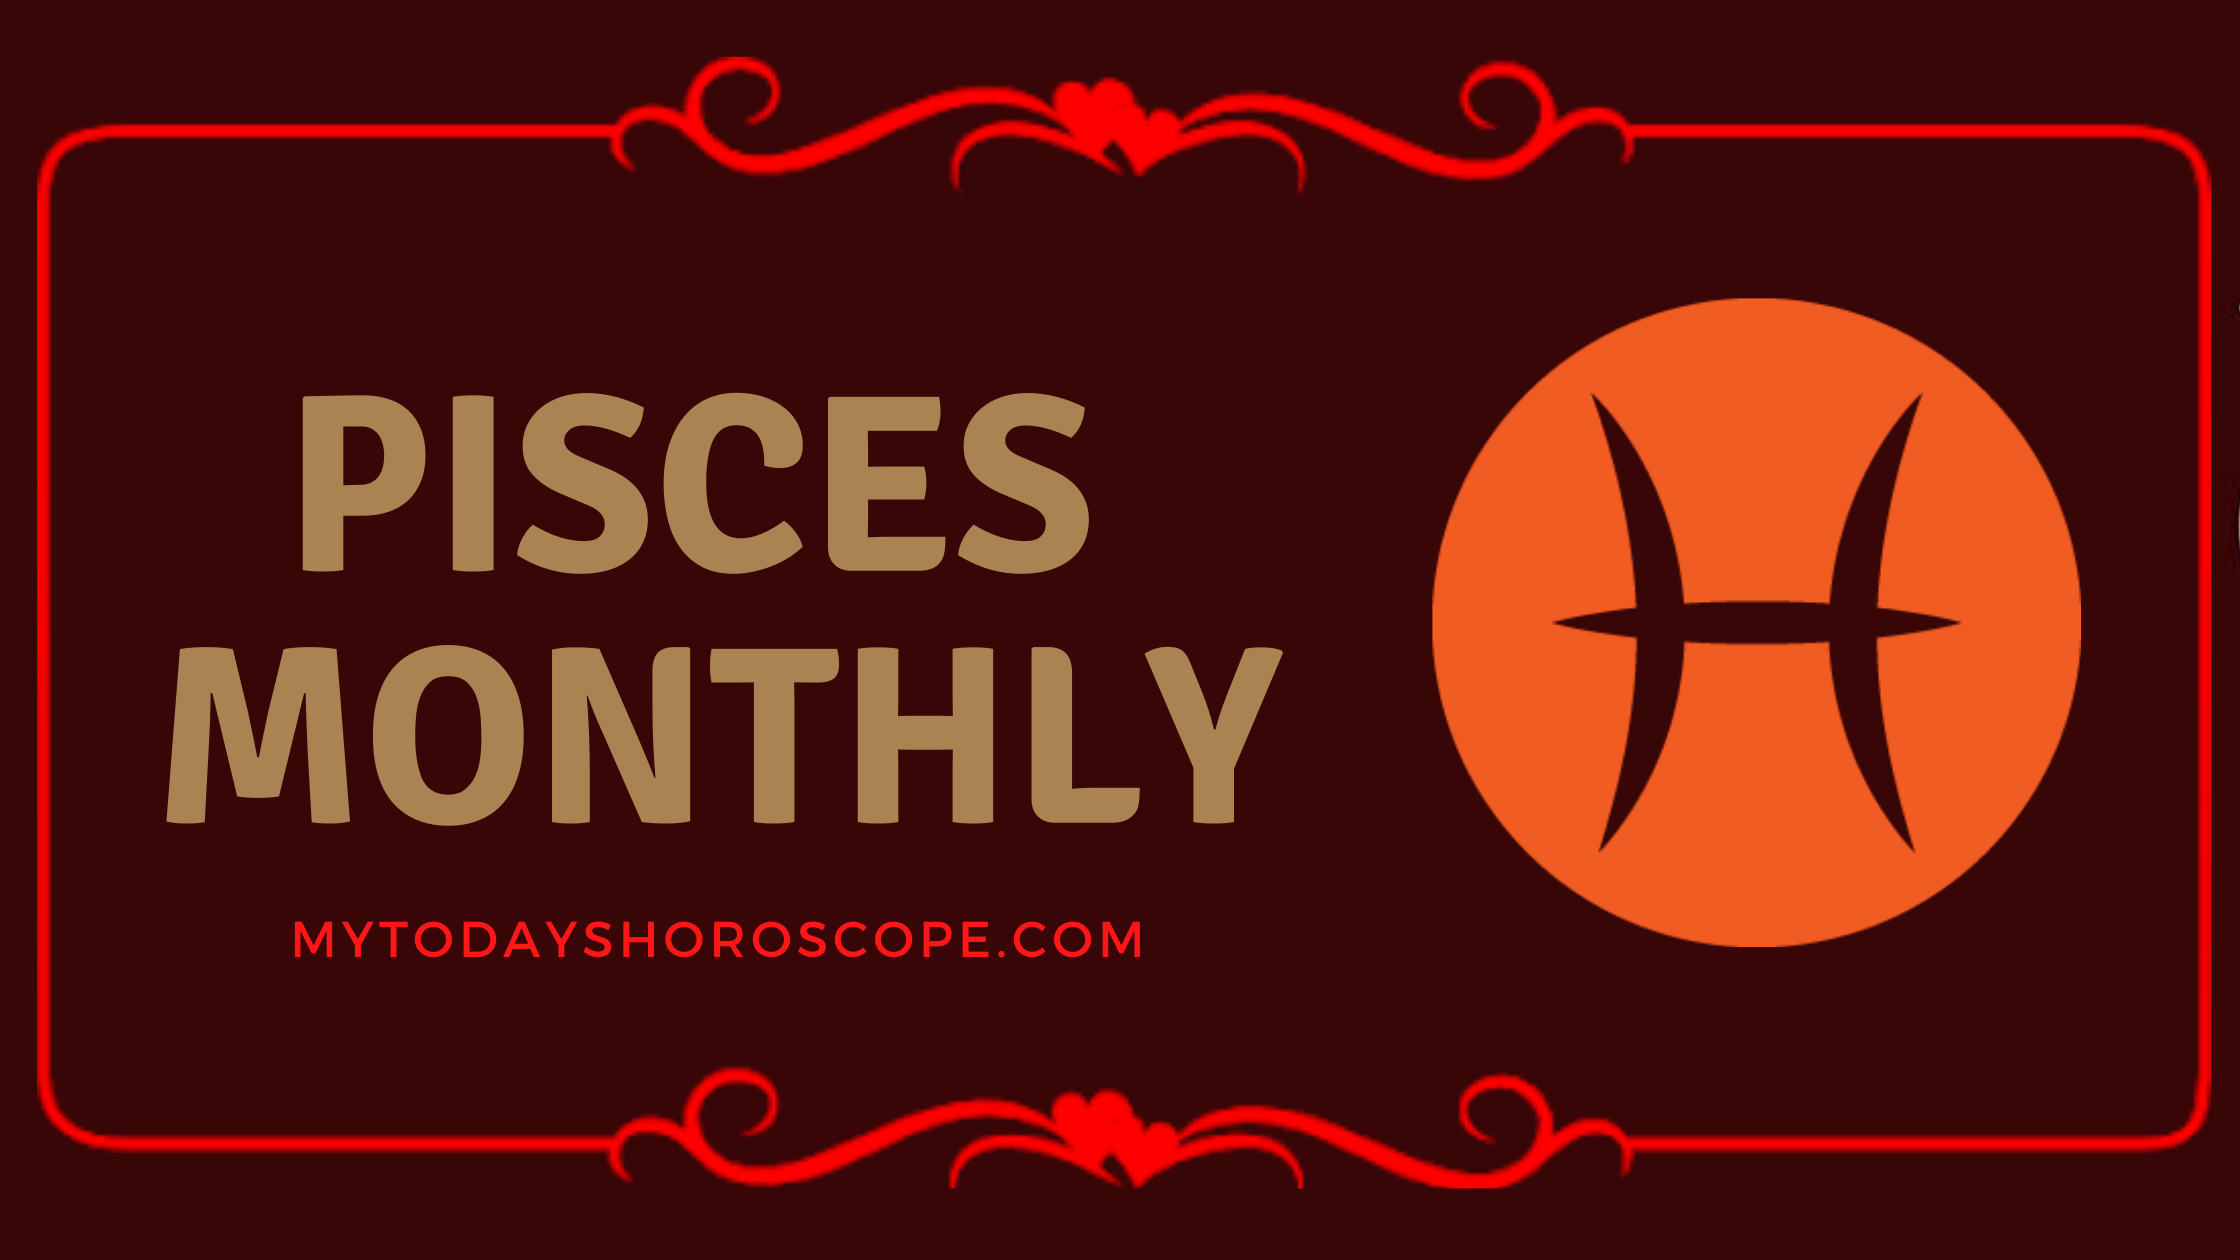 Pisces Monthly Love Horoscope for Singles and Couples